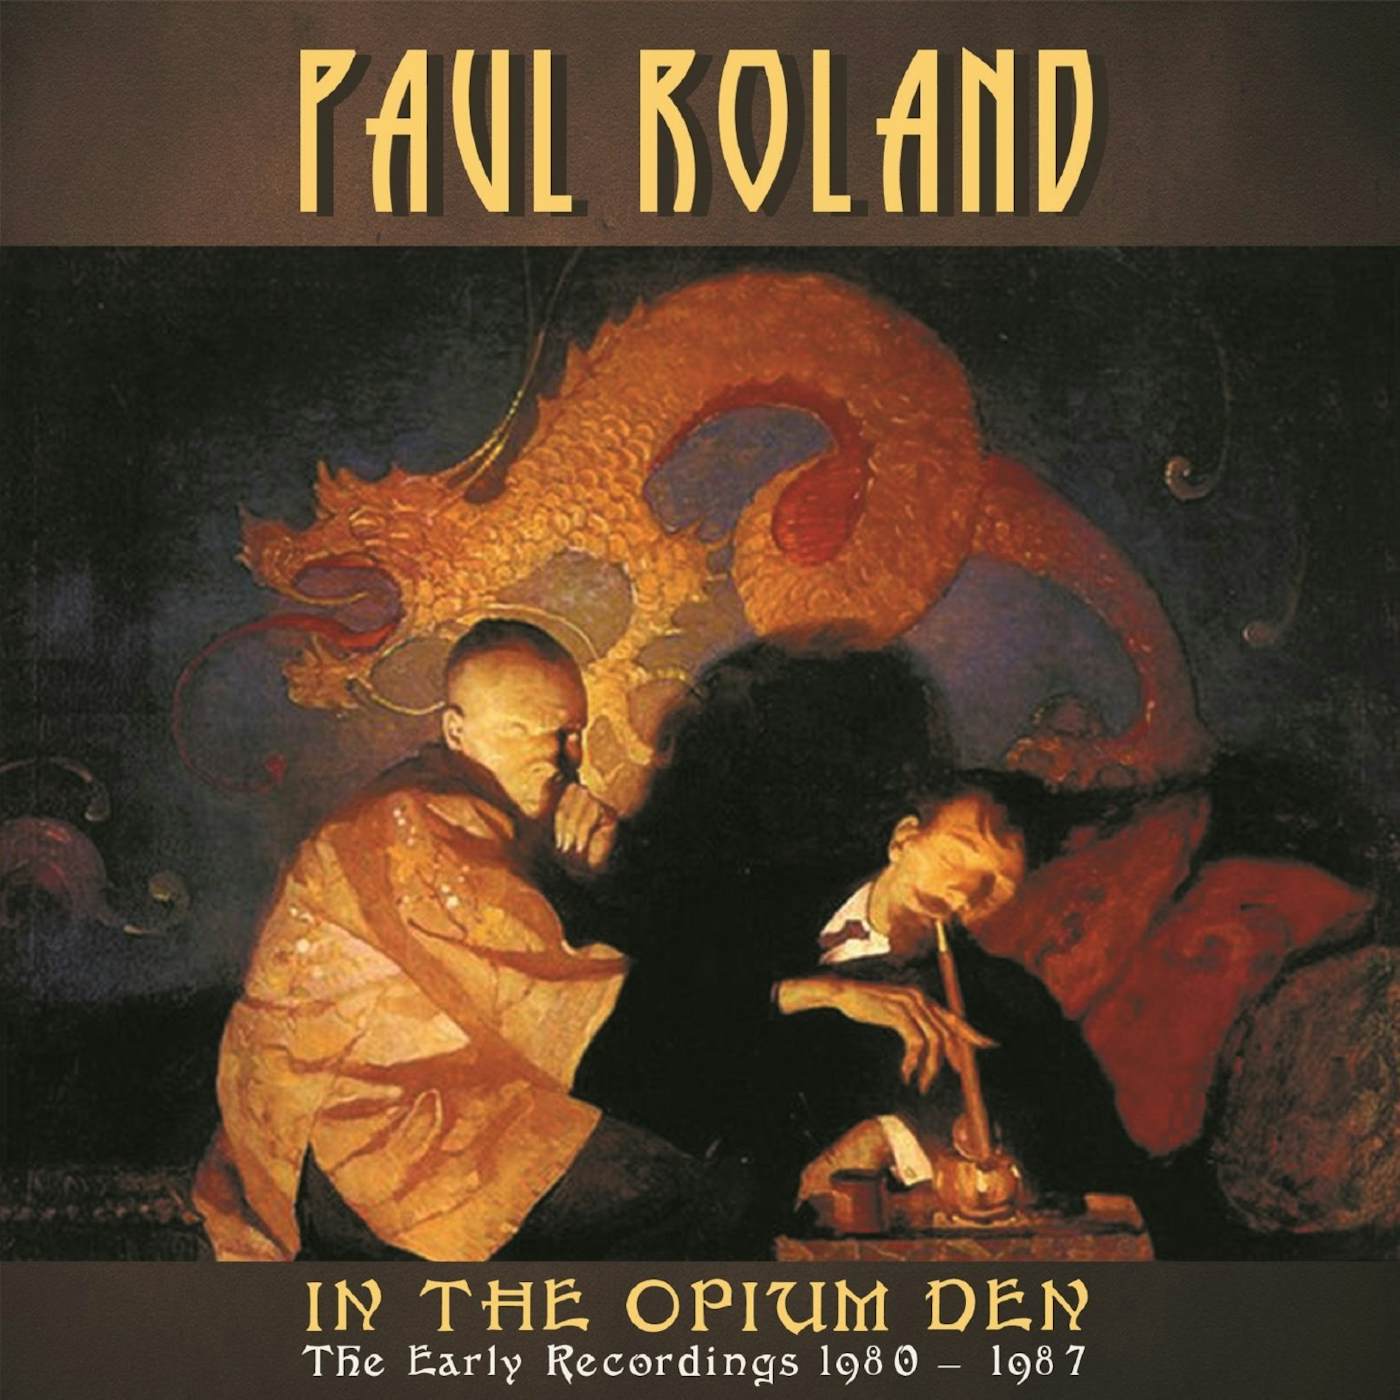 Paul Roland IN THE OPIUM DEN: EARLY RECORDINGS 1980-87 CD